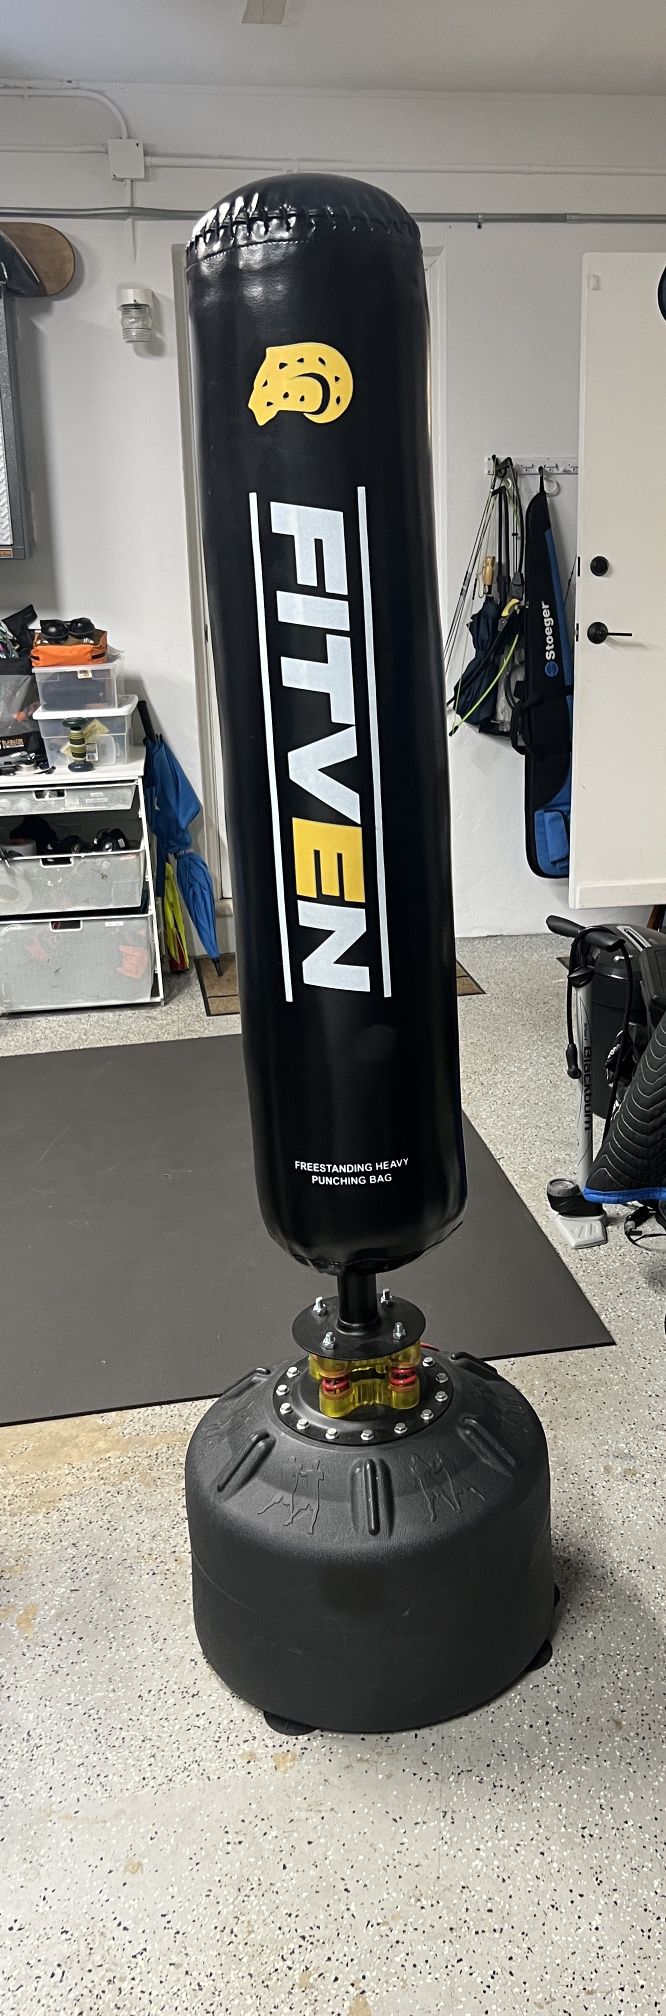 Punching Bag With Gloves